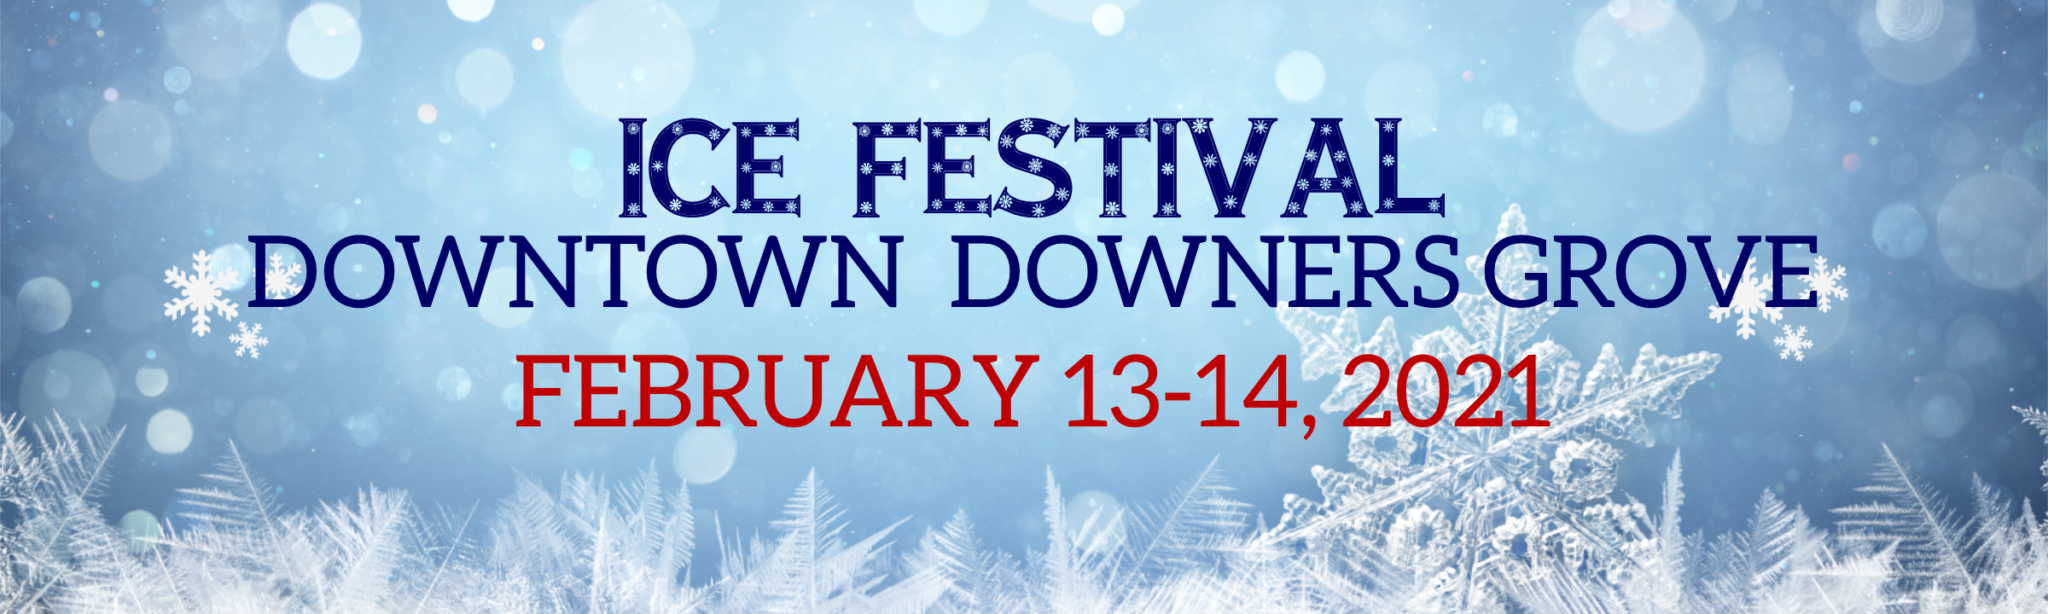 Ice Festival Downtown Downers Grove Downtown Downers Grove Management